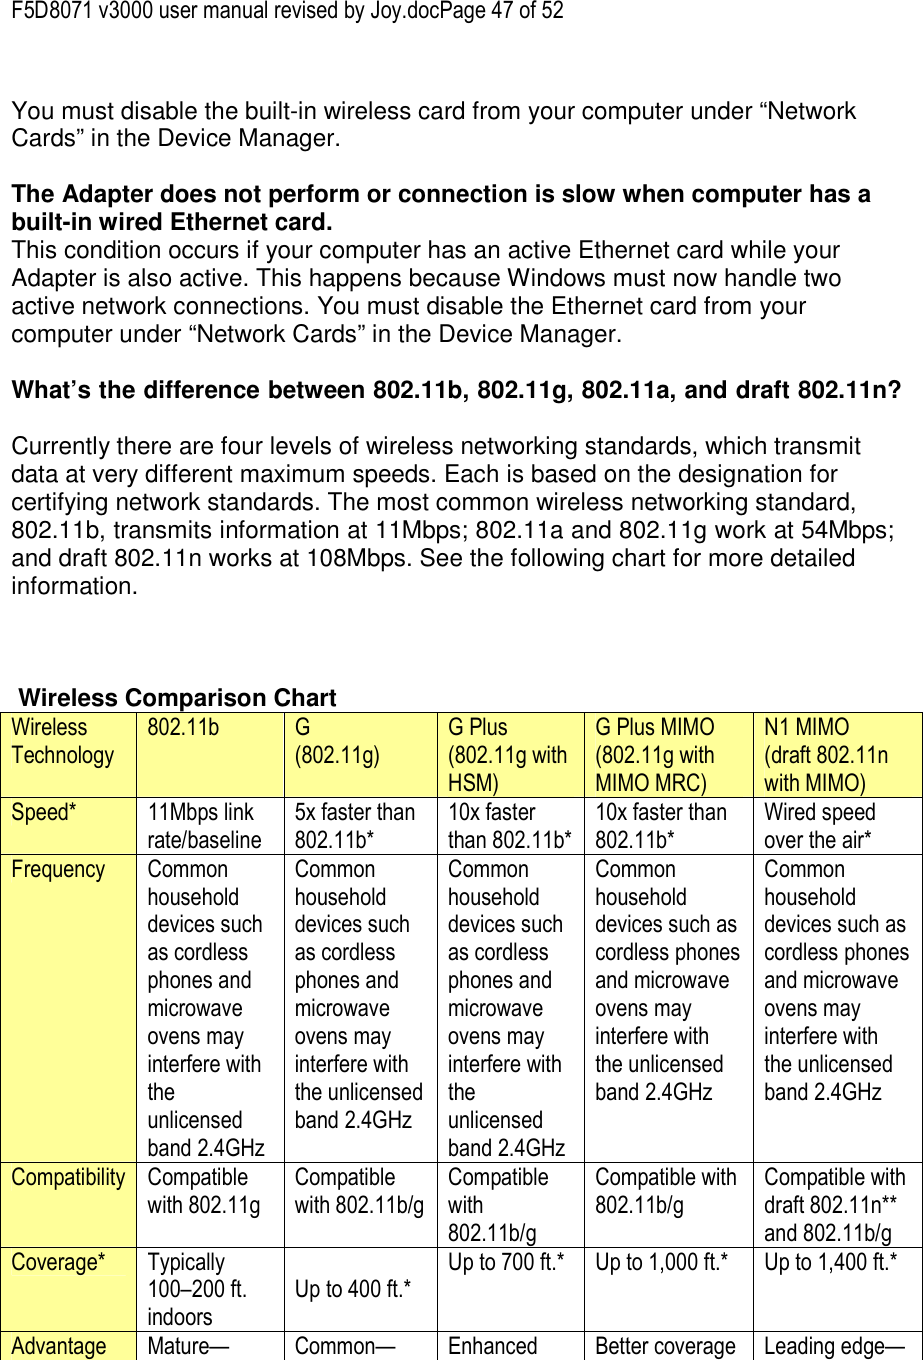 F5D8071 v3000 user manual revised by Joy.docPage 47 of 52  You must disable the built-in wireless card from your computer under “Network Cards” in the Device Manager.  The Adapter does not perform or connection is slow when computer has a built-in wired Ethernet card. This condition occurs if your computer has an active Ethernet card while your Adapter is also active. This happens because Windows must now handle two active network connections. You must disable the Ethernet card from your computer under “Network Cards” in the Device Manager.  What’s the difference between 802.11b, 802.11g, 802.11a, and draft 802.11n?  Currently there are four levels of wireless networking standards, which transmit data at very different maximum speeds. Each is based on the designation for certifying network standards. The most common wireless networking standard, 802.11b, transmits information at 11Mbps; 802.11a and 802.11g work at 54Mbps; and draft 802.11n works at 108Mbps. See the following chart for more detailed information.     Wireless Comparison Chart Wireless Technology 802.11b  G  (802.11g) G Plus (802.11g with HSM) G Plus MIMO (802.11g with MIMO MRC) N1 MIMO (draft 802.11n with MIMO) Speed*  11Mbps link rate/baseline 5x faster than 802.11b* 10x faster than 802.11b* 10x faster than 802.11b* Wired speed over the air* Frequency  Common household devices such as cordless phones and microwave ovens may interfere with the unlicensed band 2.4GHz Common household devices such as cordless phones and microwave ovens may interfere with the unlicensed band 2.4GHz Common household devices such as cordless phones and microwave ovens may interfere with the unlicensed band 2.4GHz Common household devices such as cordless phones and microwave ovens may interfere with the unlicensed band 2.4GHz Common household devices such as cordless phones and microwave ovens may interfere with the unlicensed band 2.4GHz Compatibility Compatible with 802.11g Compatible with 802.11b/g Compatible with 802.11b/g Compatible with 802.11b/g Compatible with draft 802.11n** and 802.11b/g  Coverage*  Typically 100–200 ft. indoors  Up to 400 ft.* Up to 700 ft.*  Up to 1,000 ft.*  Up to 1,400 ft.*  Advantage  Mature— Common— Enhanced  Better coverage  Leading edge— 